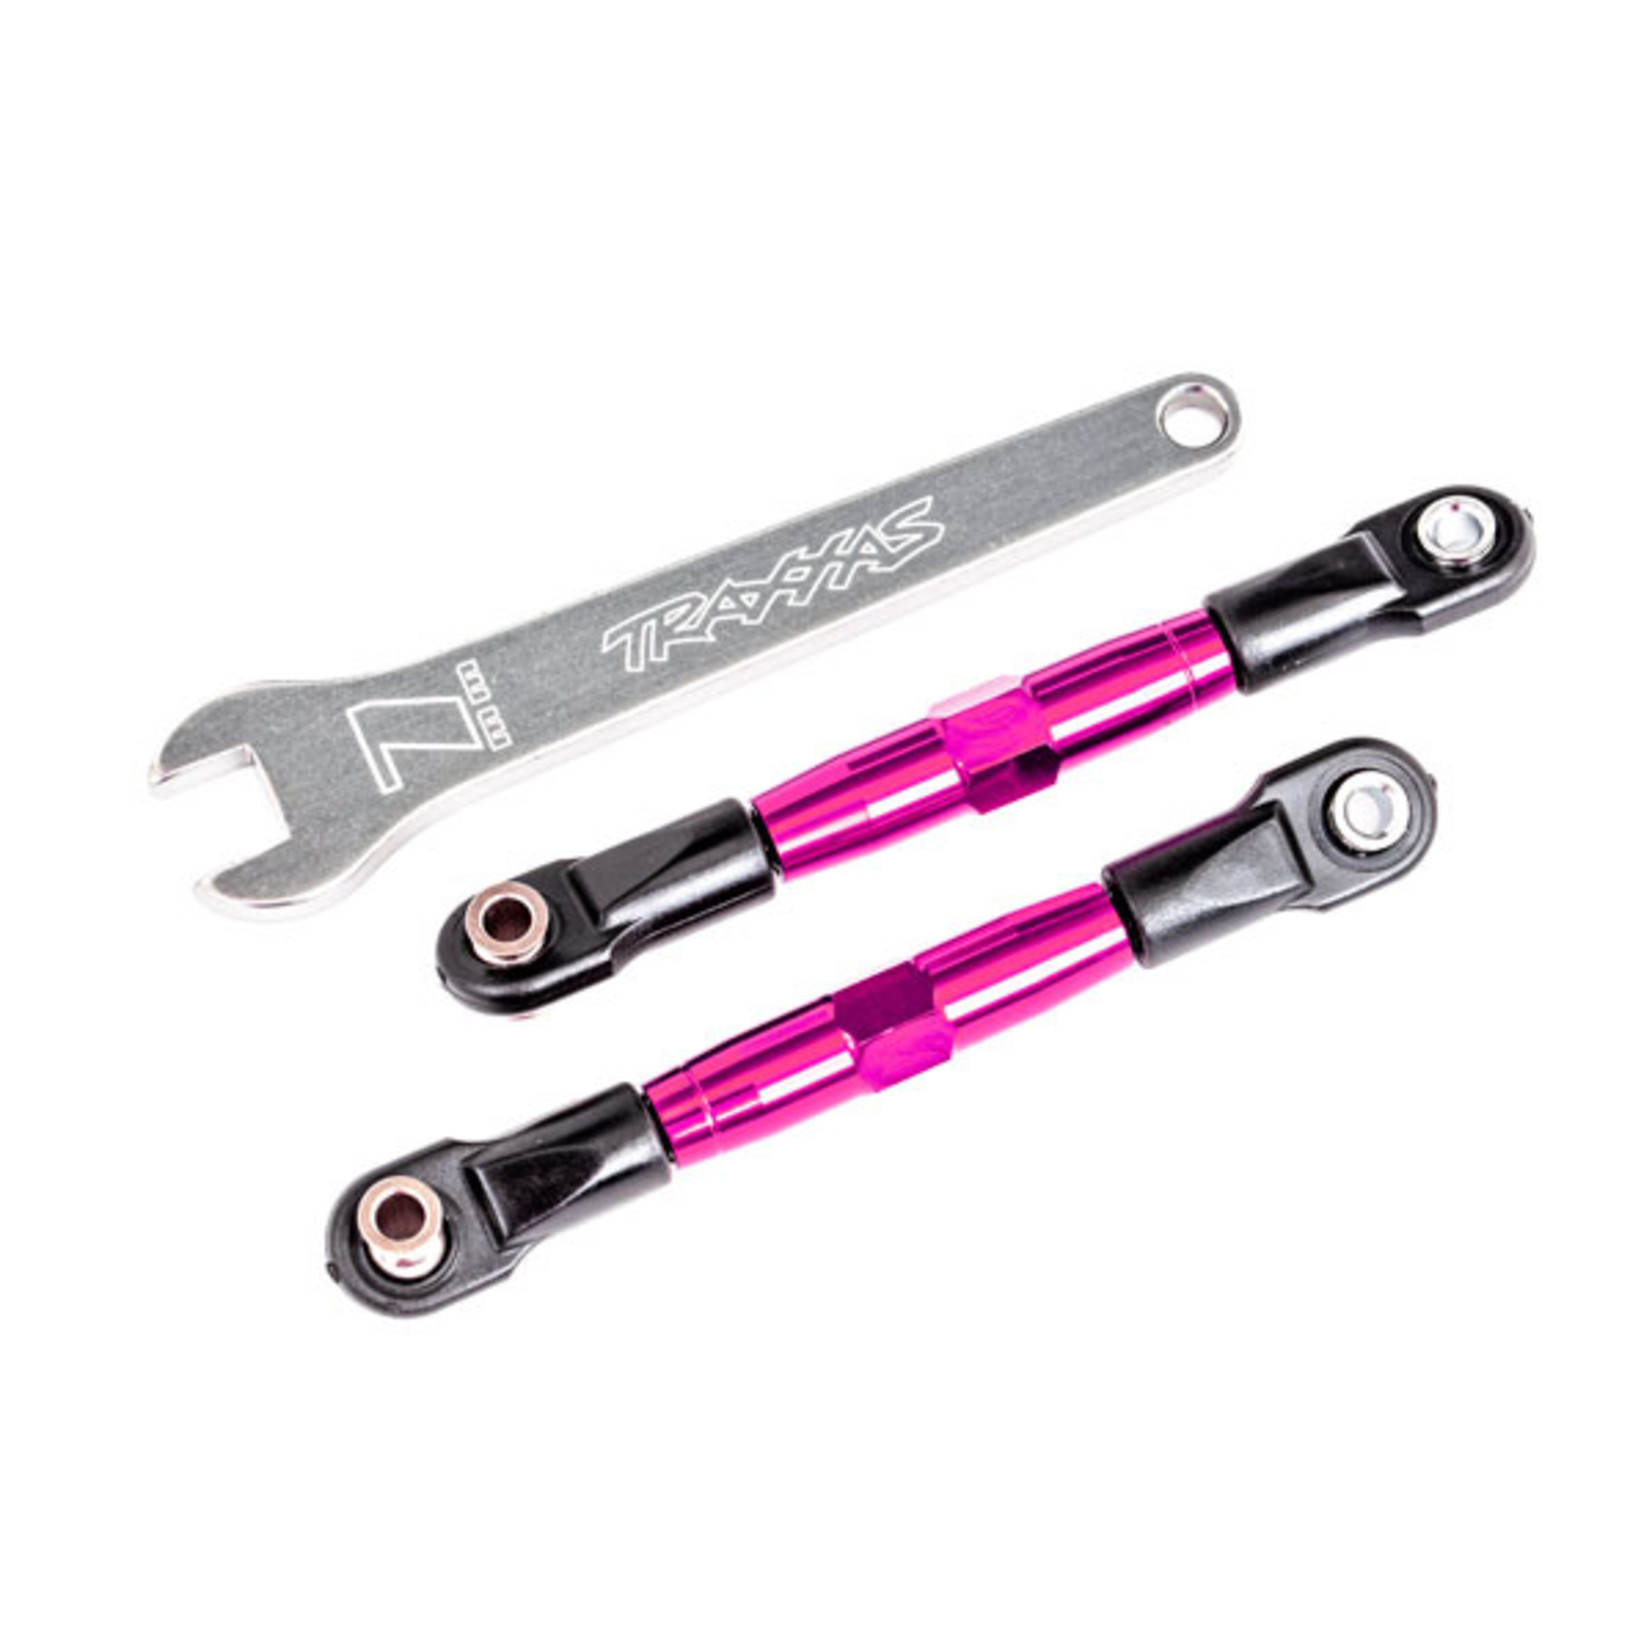 Traxxas 2444P - Camber links, front (TUBES pink-anodized, 7075-